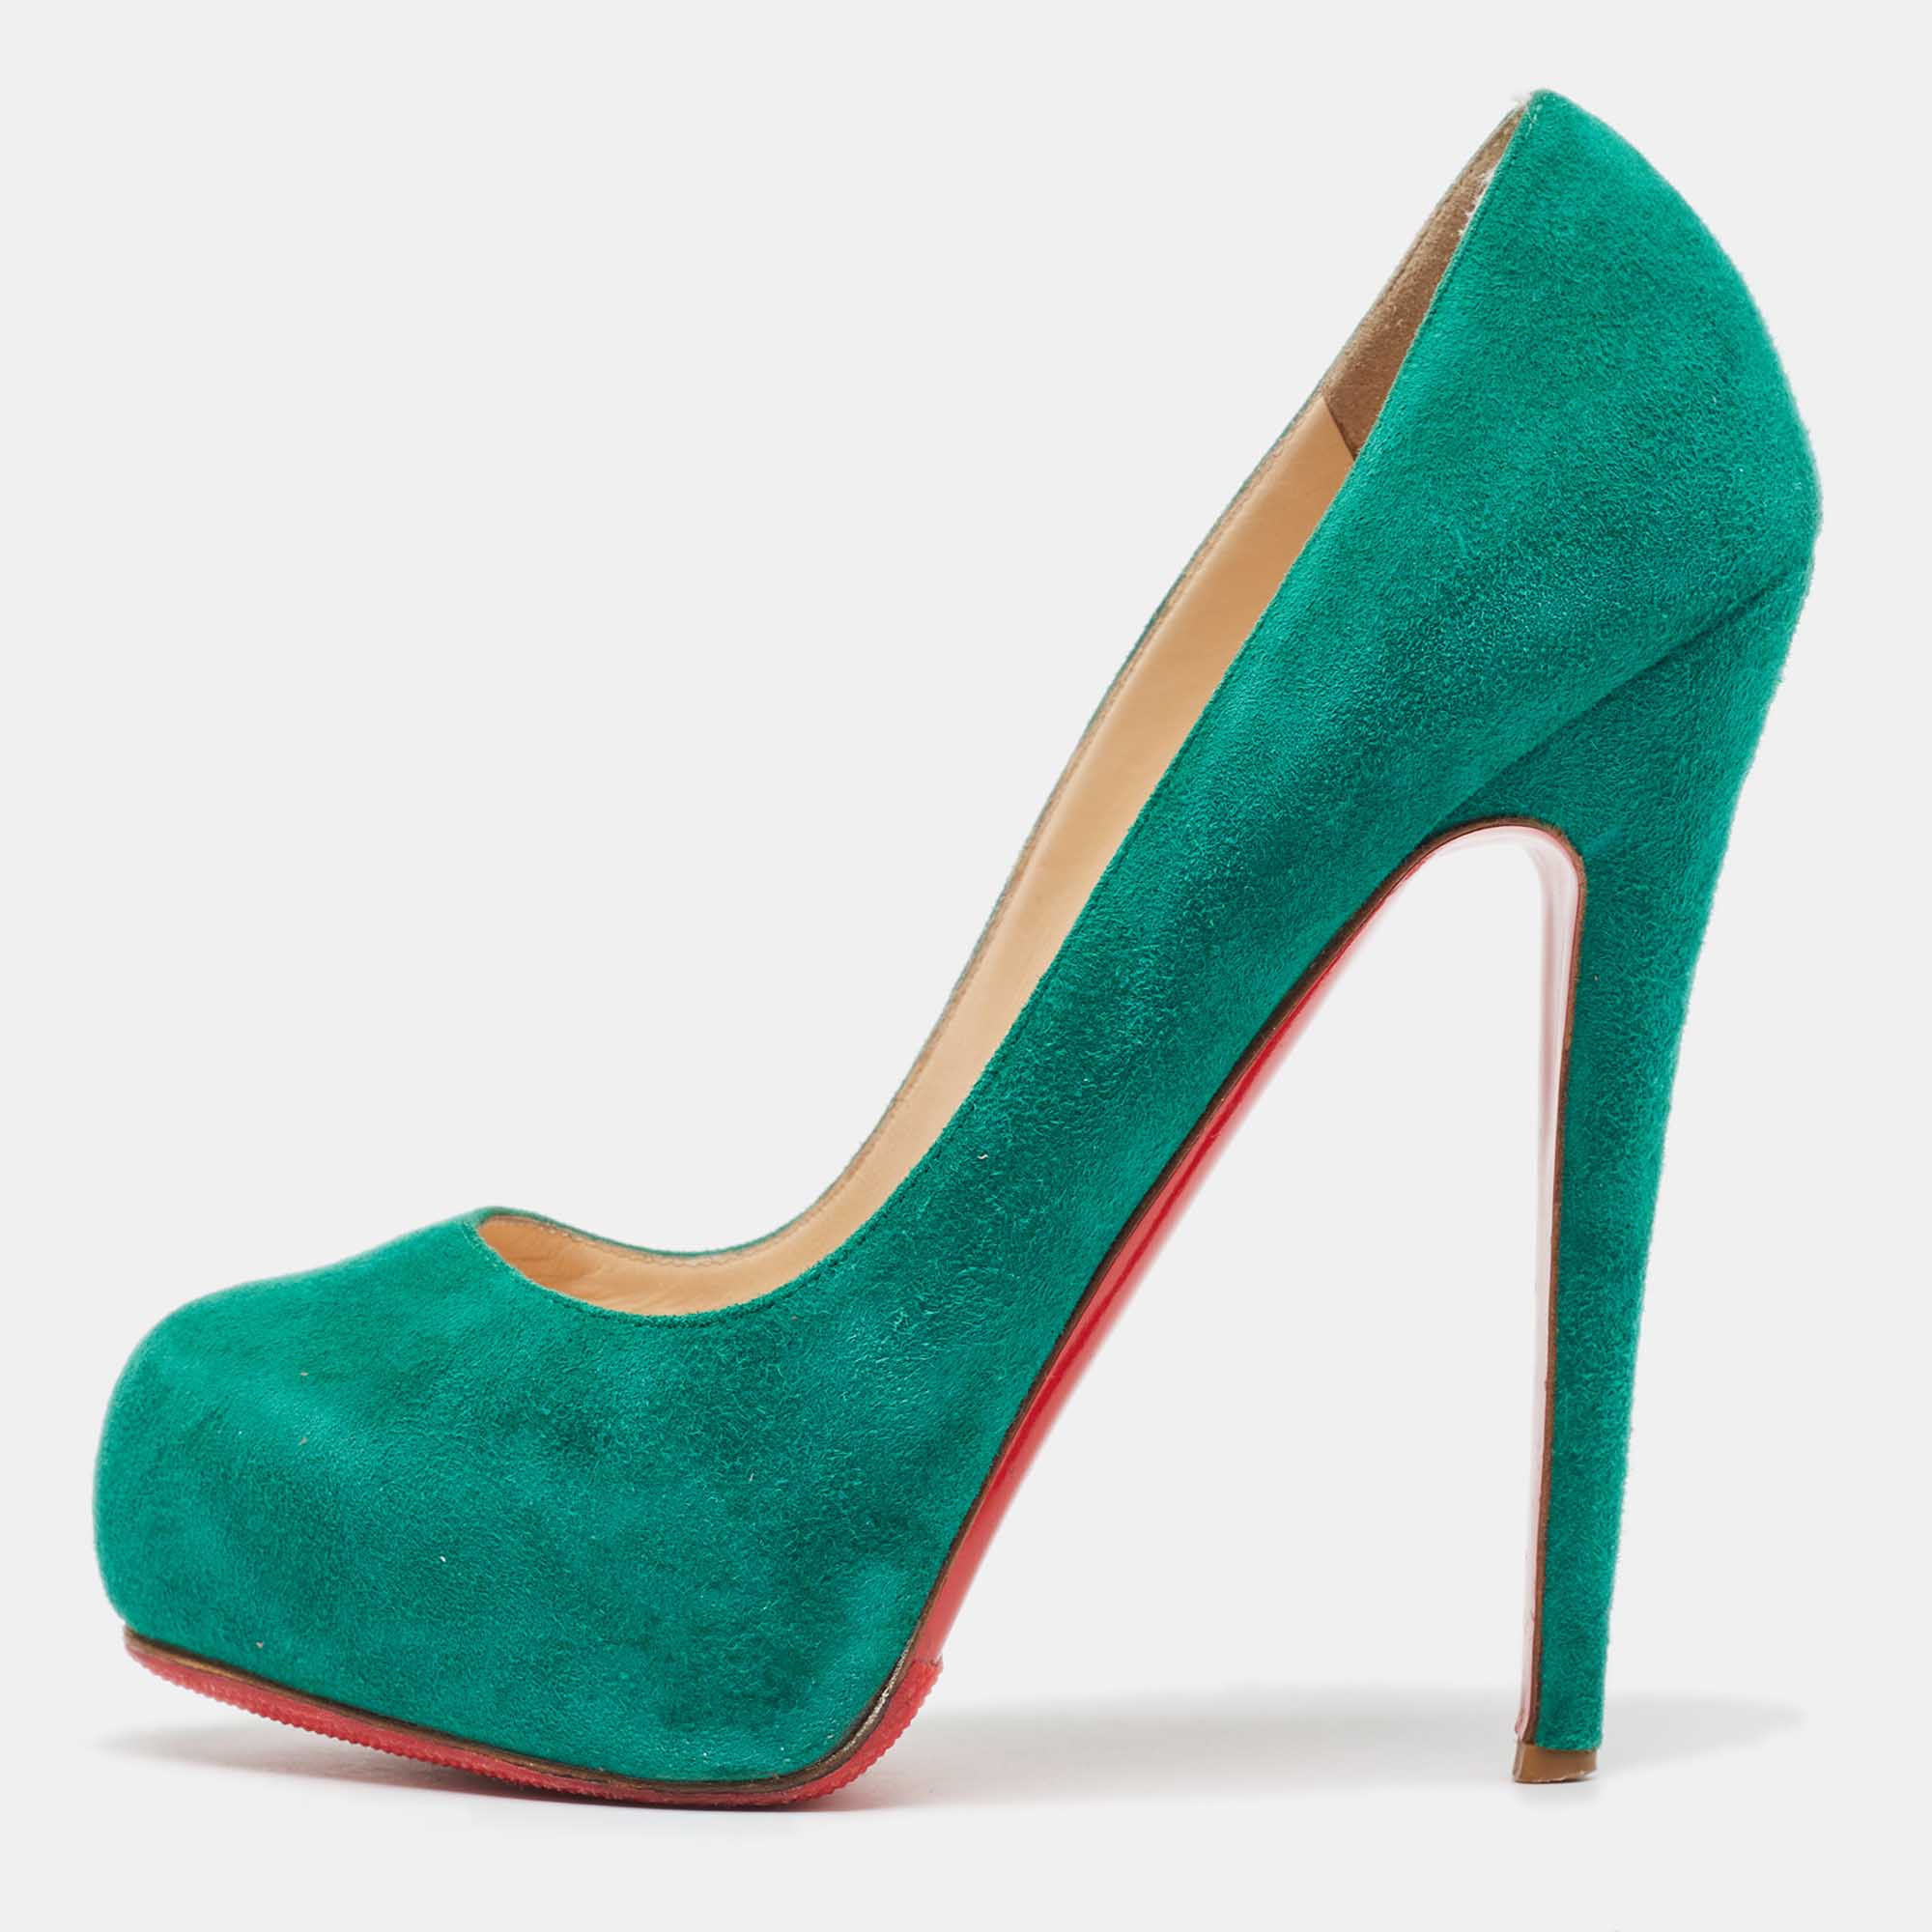 Christian louboutin green suede simple pumps size 37